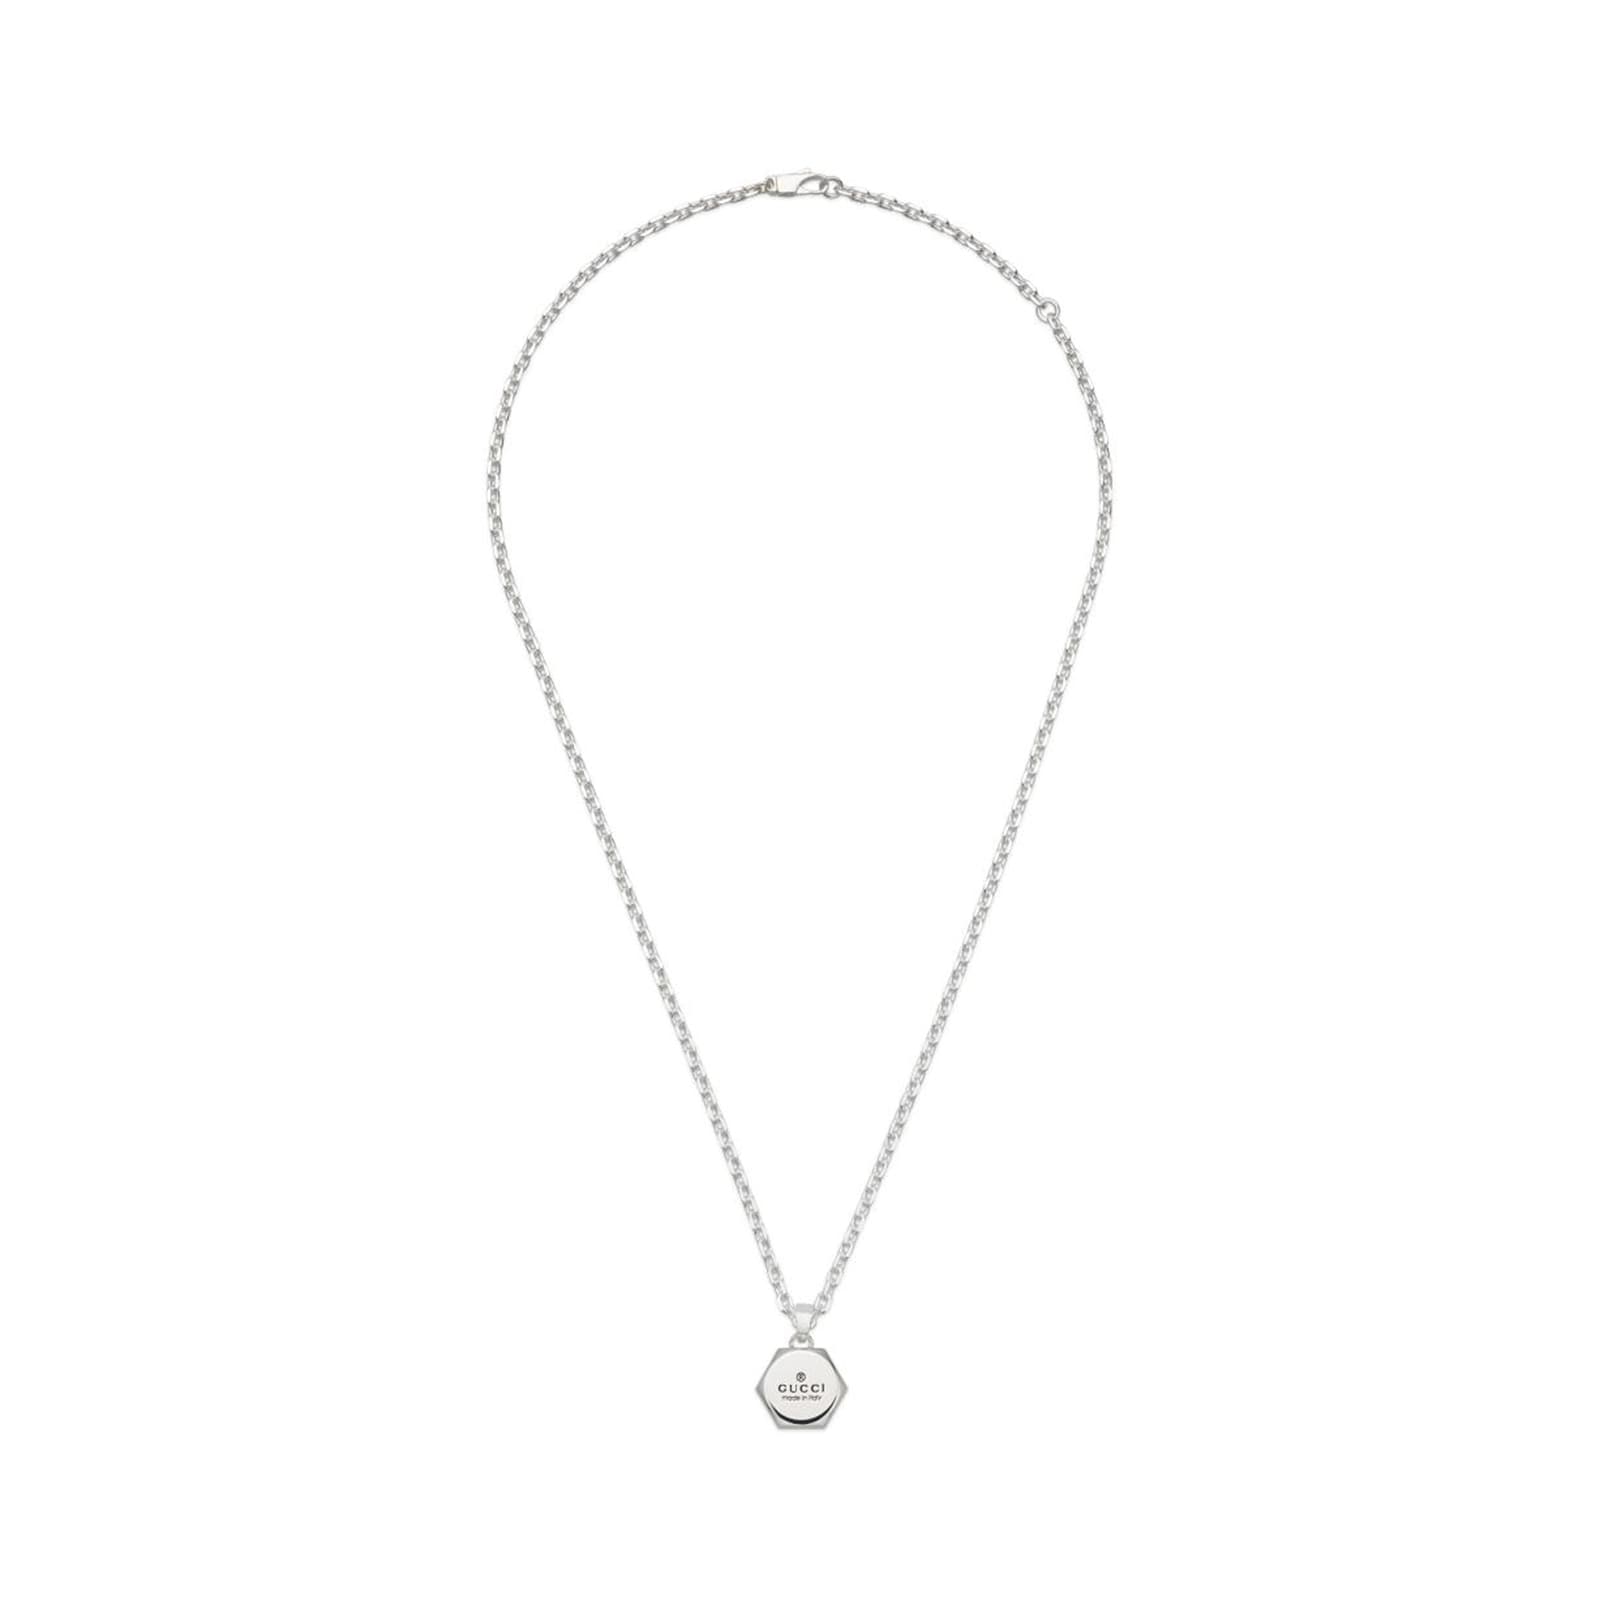 Gucci Trademark Sterling Silver Necklace YBB779175001 | Goldsmiths